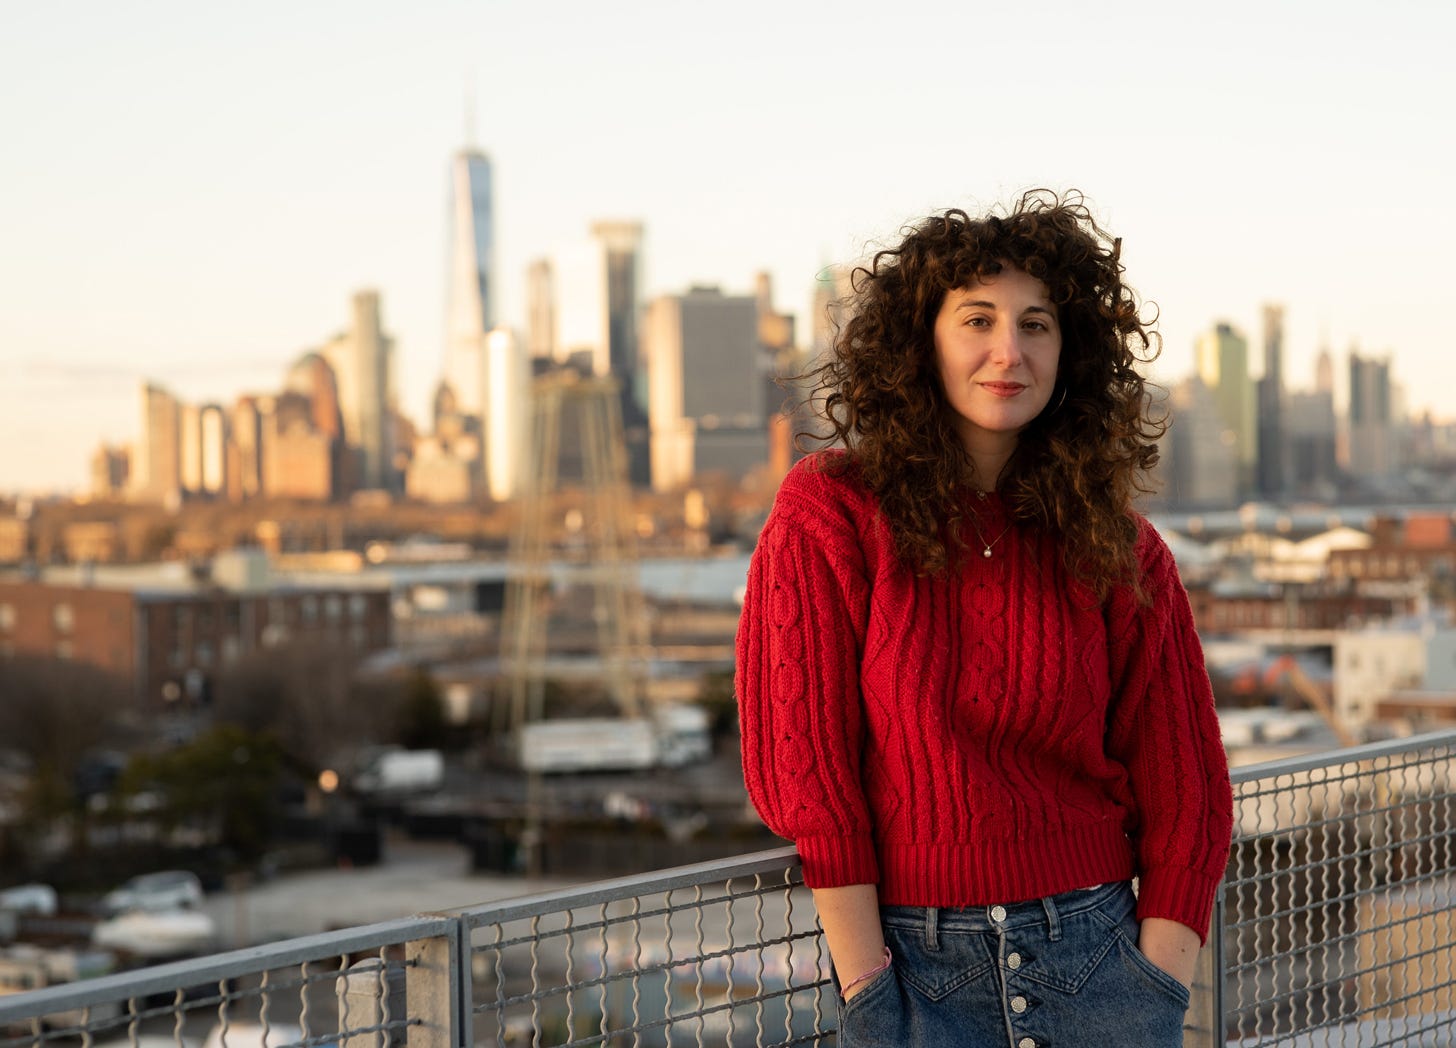 Writer Amanda Chicago Lewis stands on a balcony with the New York City skyline in the background. She's wearing a very cozy-looking red sweater.